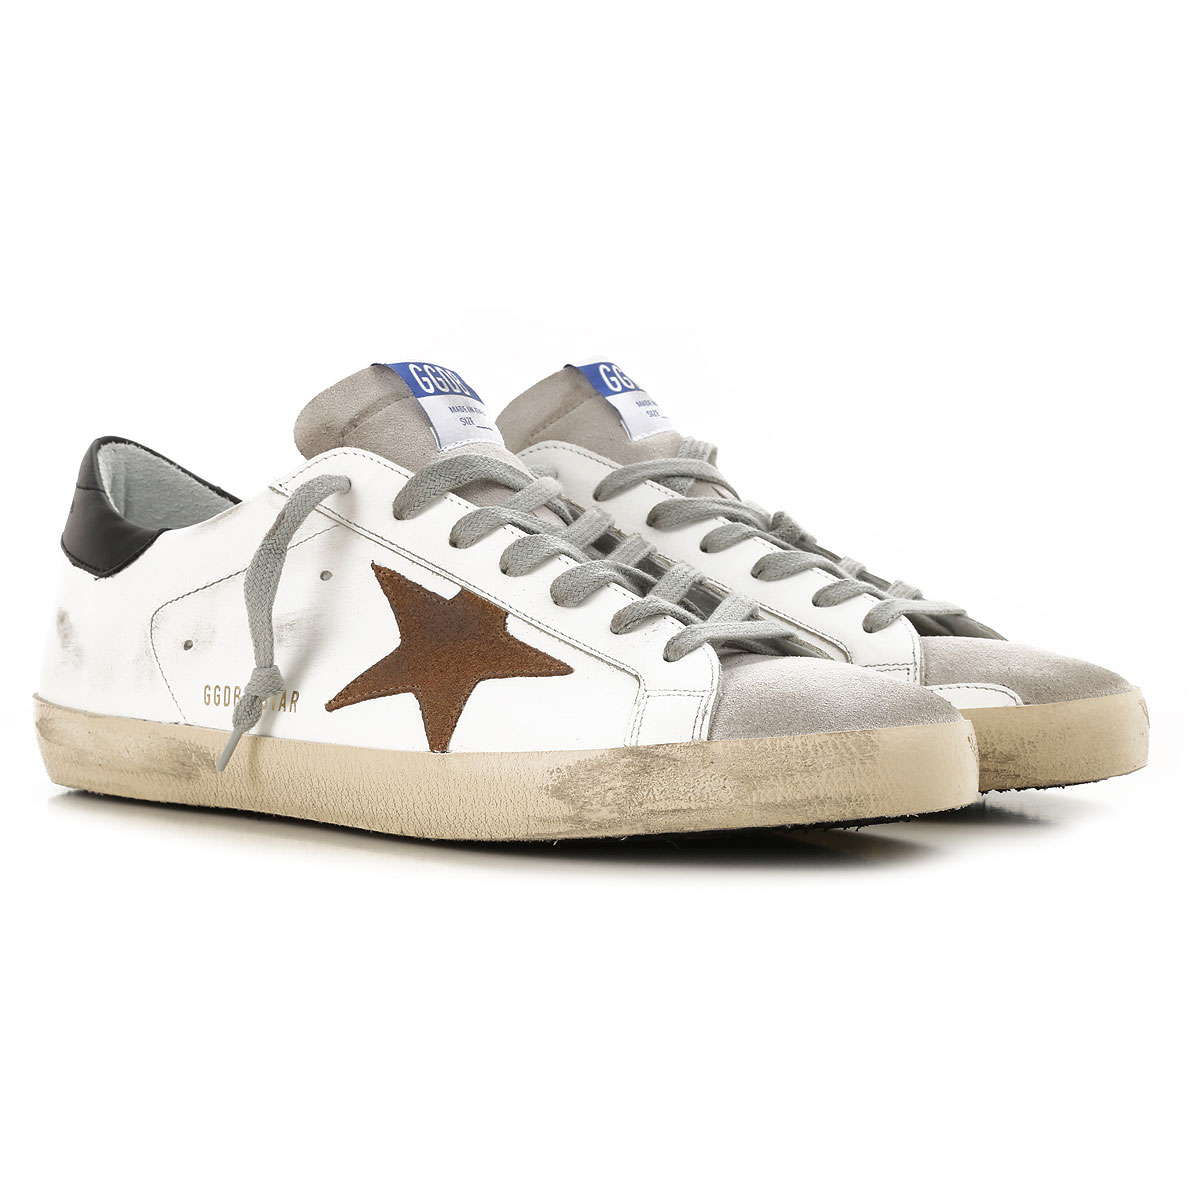 Mens Shoes Golden Goose, Style code: g34ms590-n12-